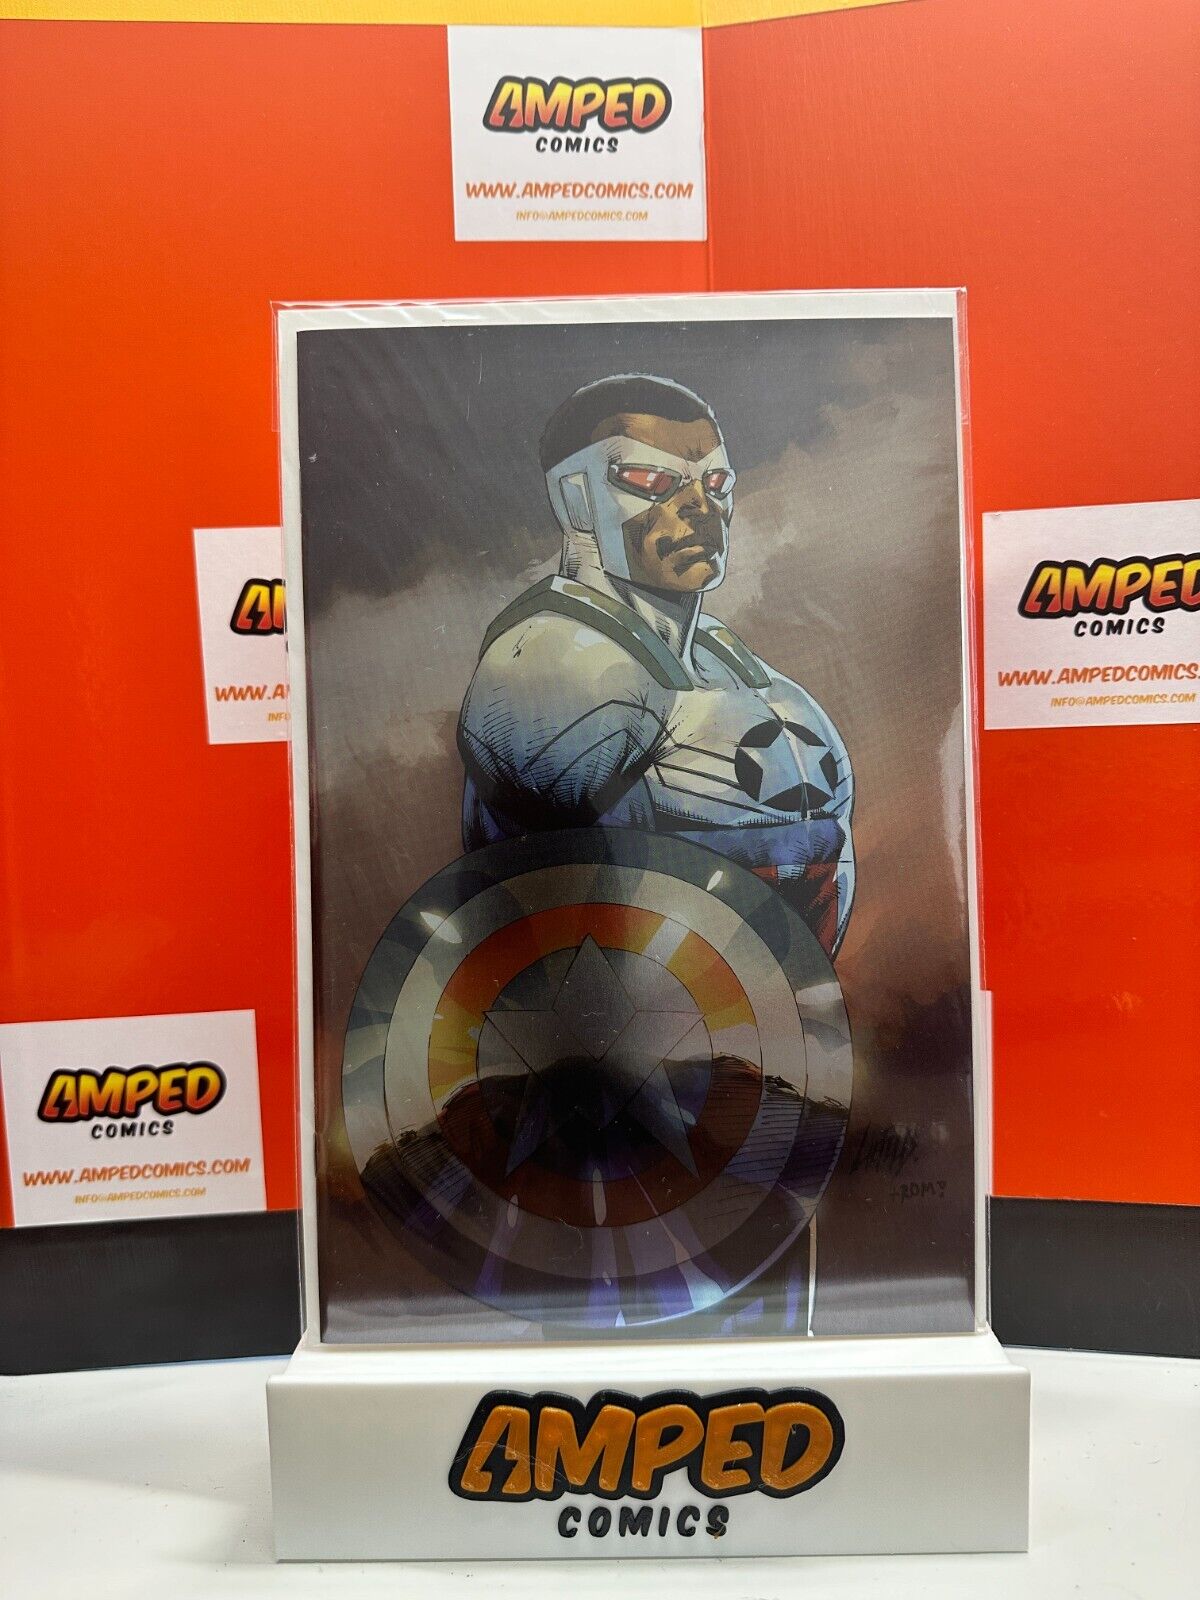 CAPTAIN AMERICA #1 ROB LIEFELD WHATNOT EXCLUSIVE NYCC TRADE VARIANT FOIL COVER